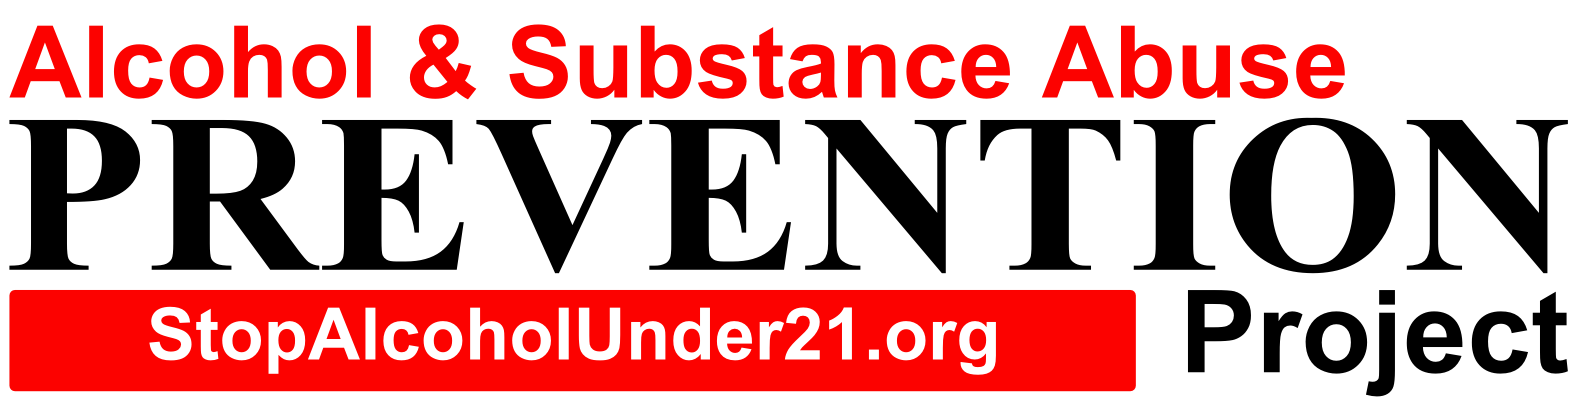 Alcohol and Substance Abuse Prevention Project Logo